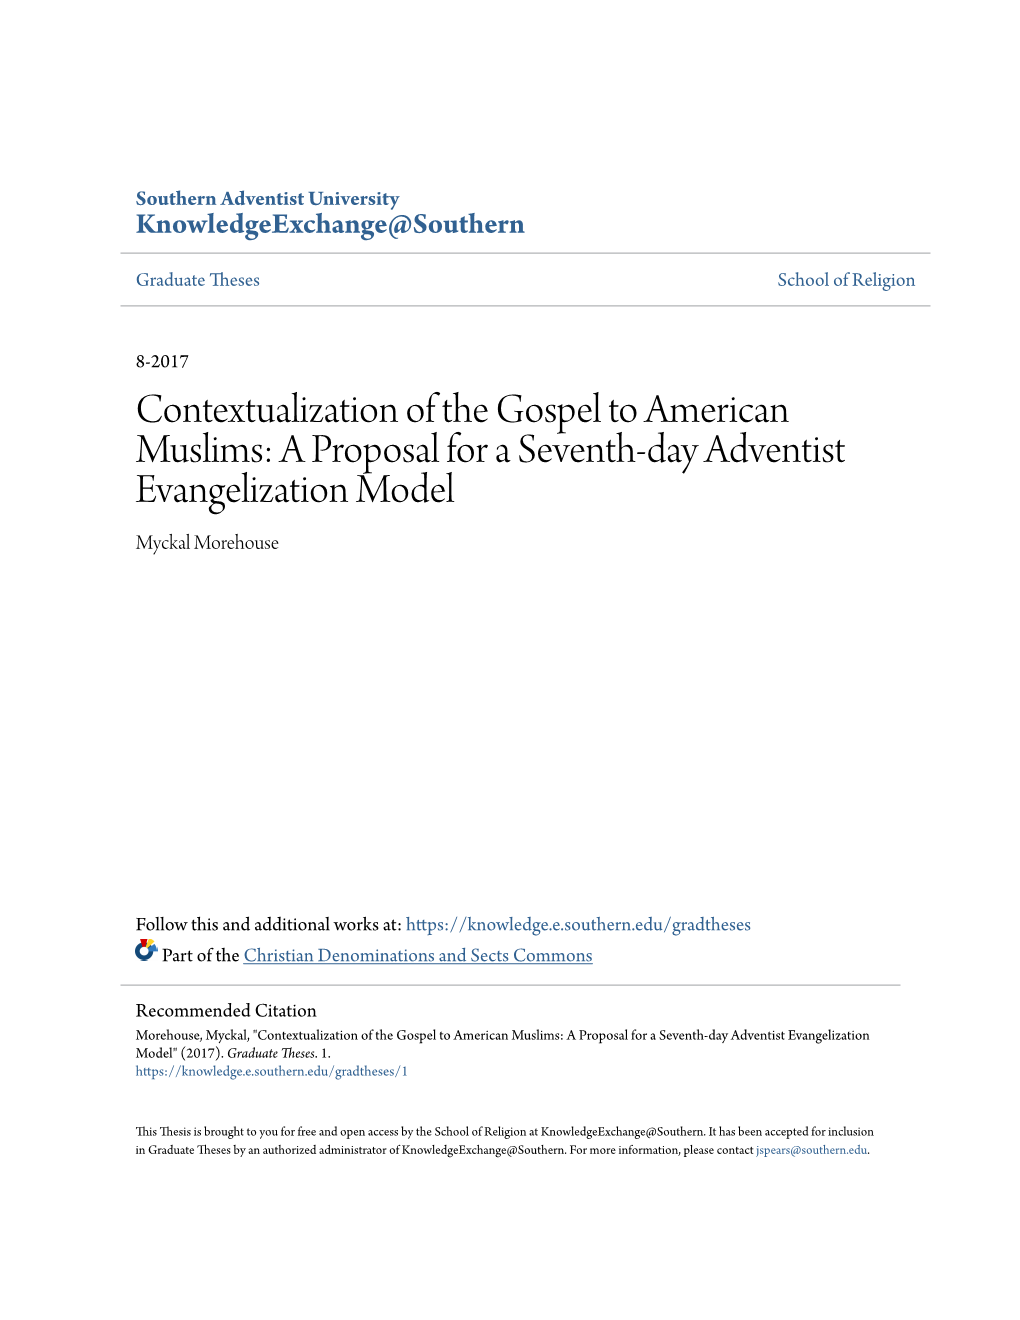 Contextualization of the Gospel to American Muslims: a Proposal for a Seventh-Day Adventist Evangelization Model Myckal Morehouse